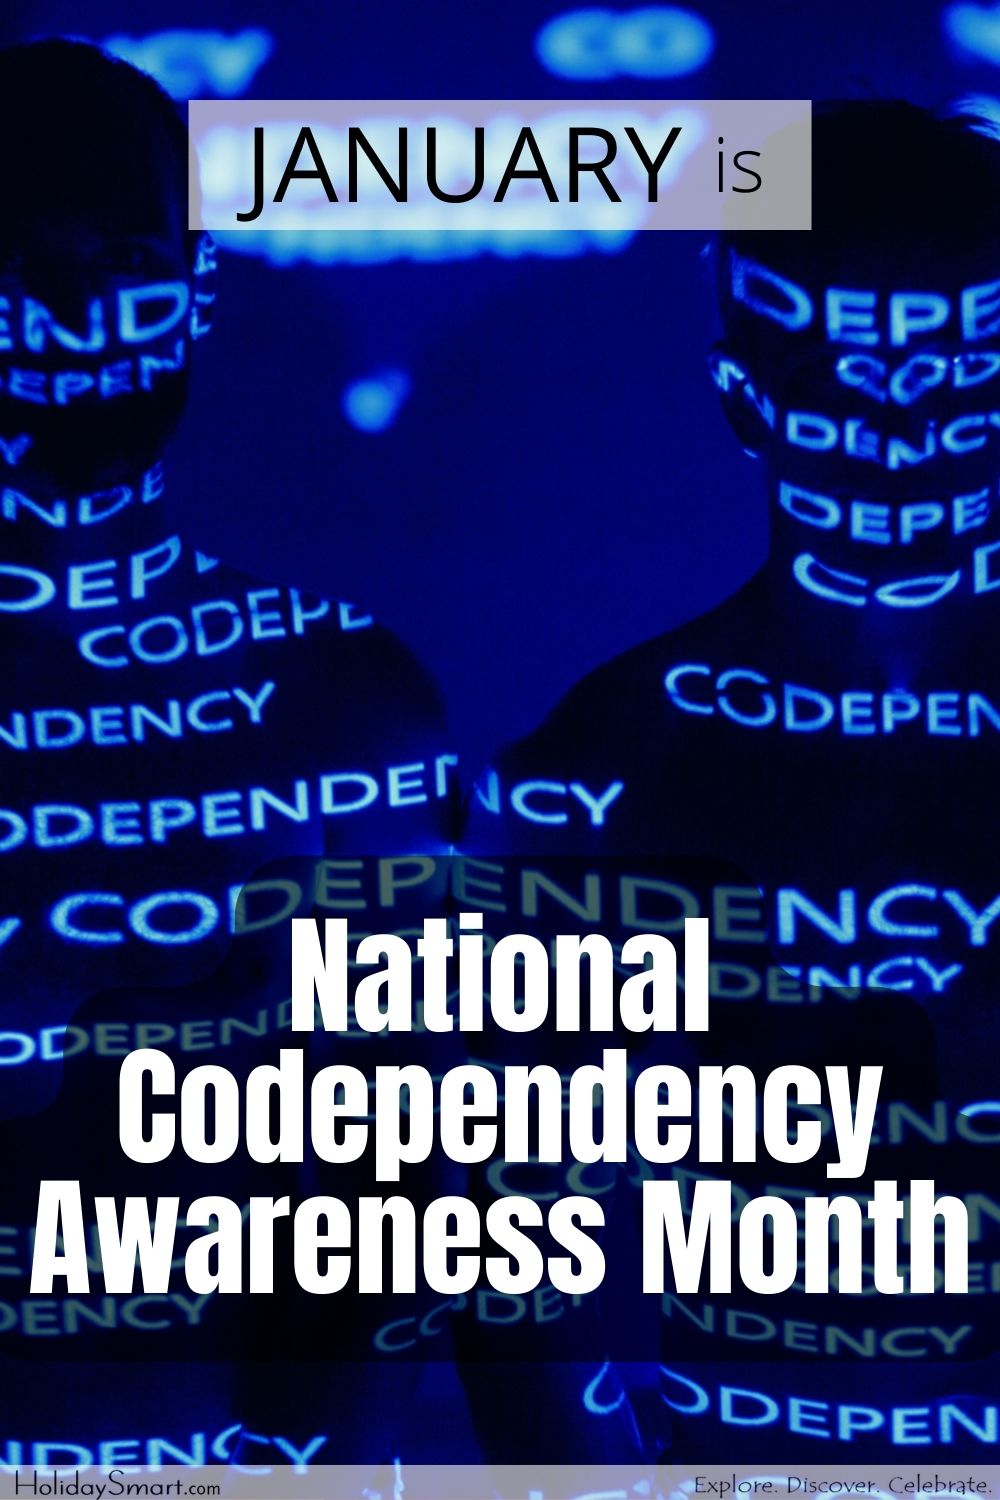 National Codependency Awareness Month